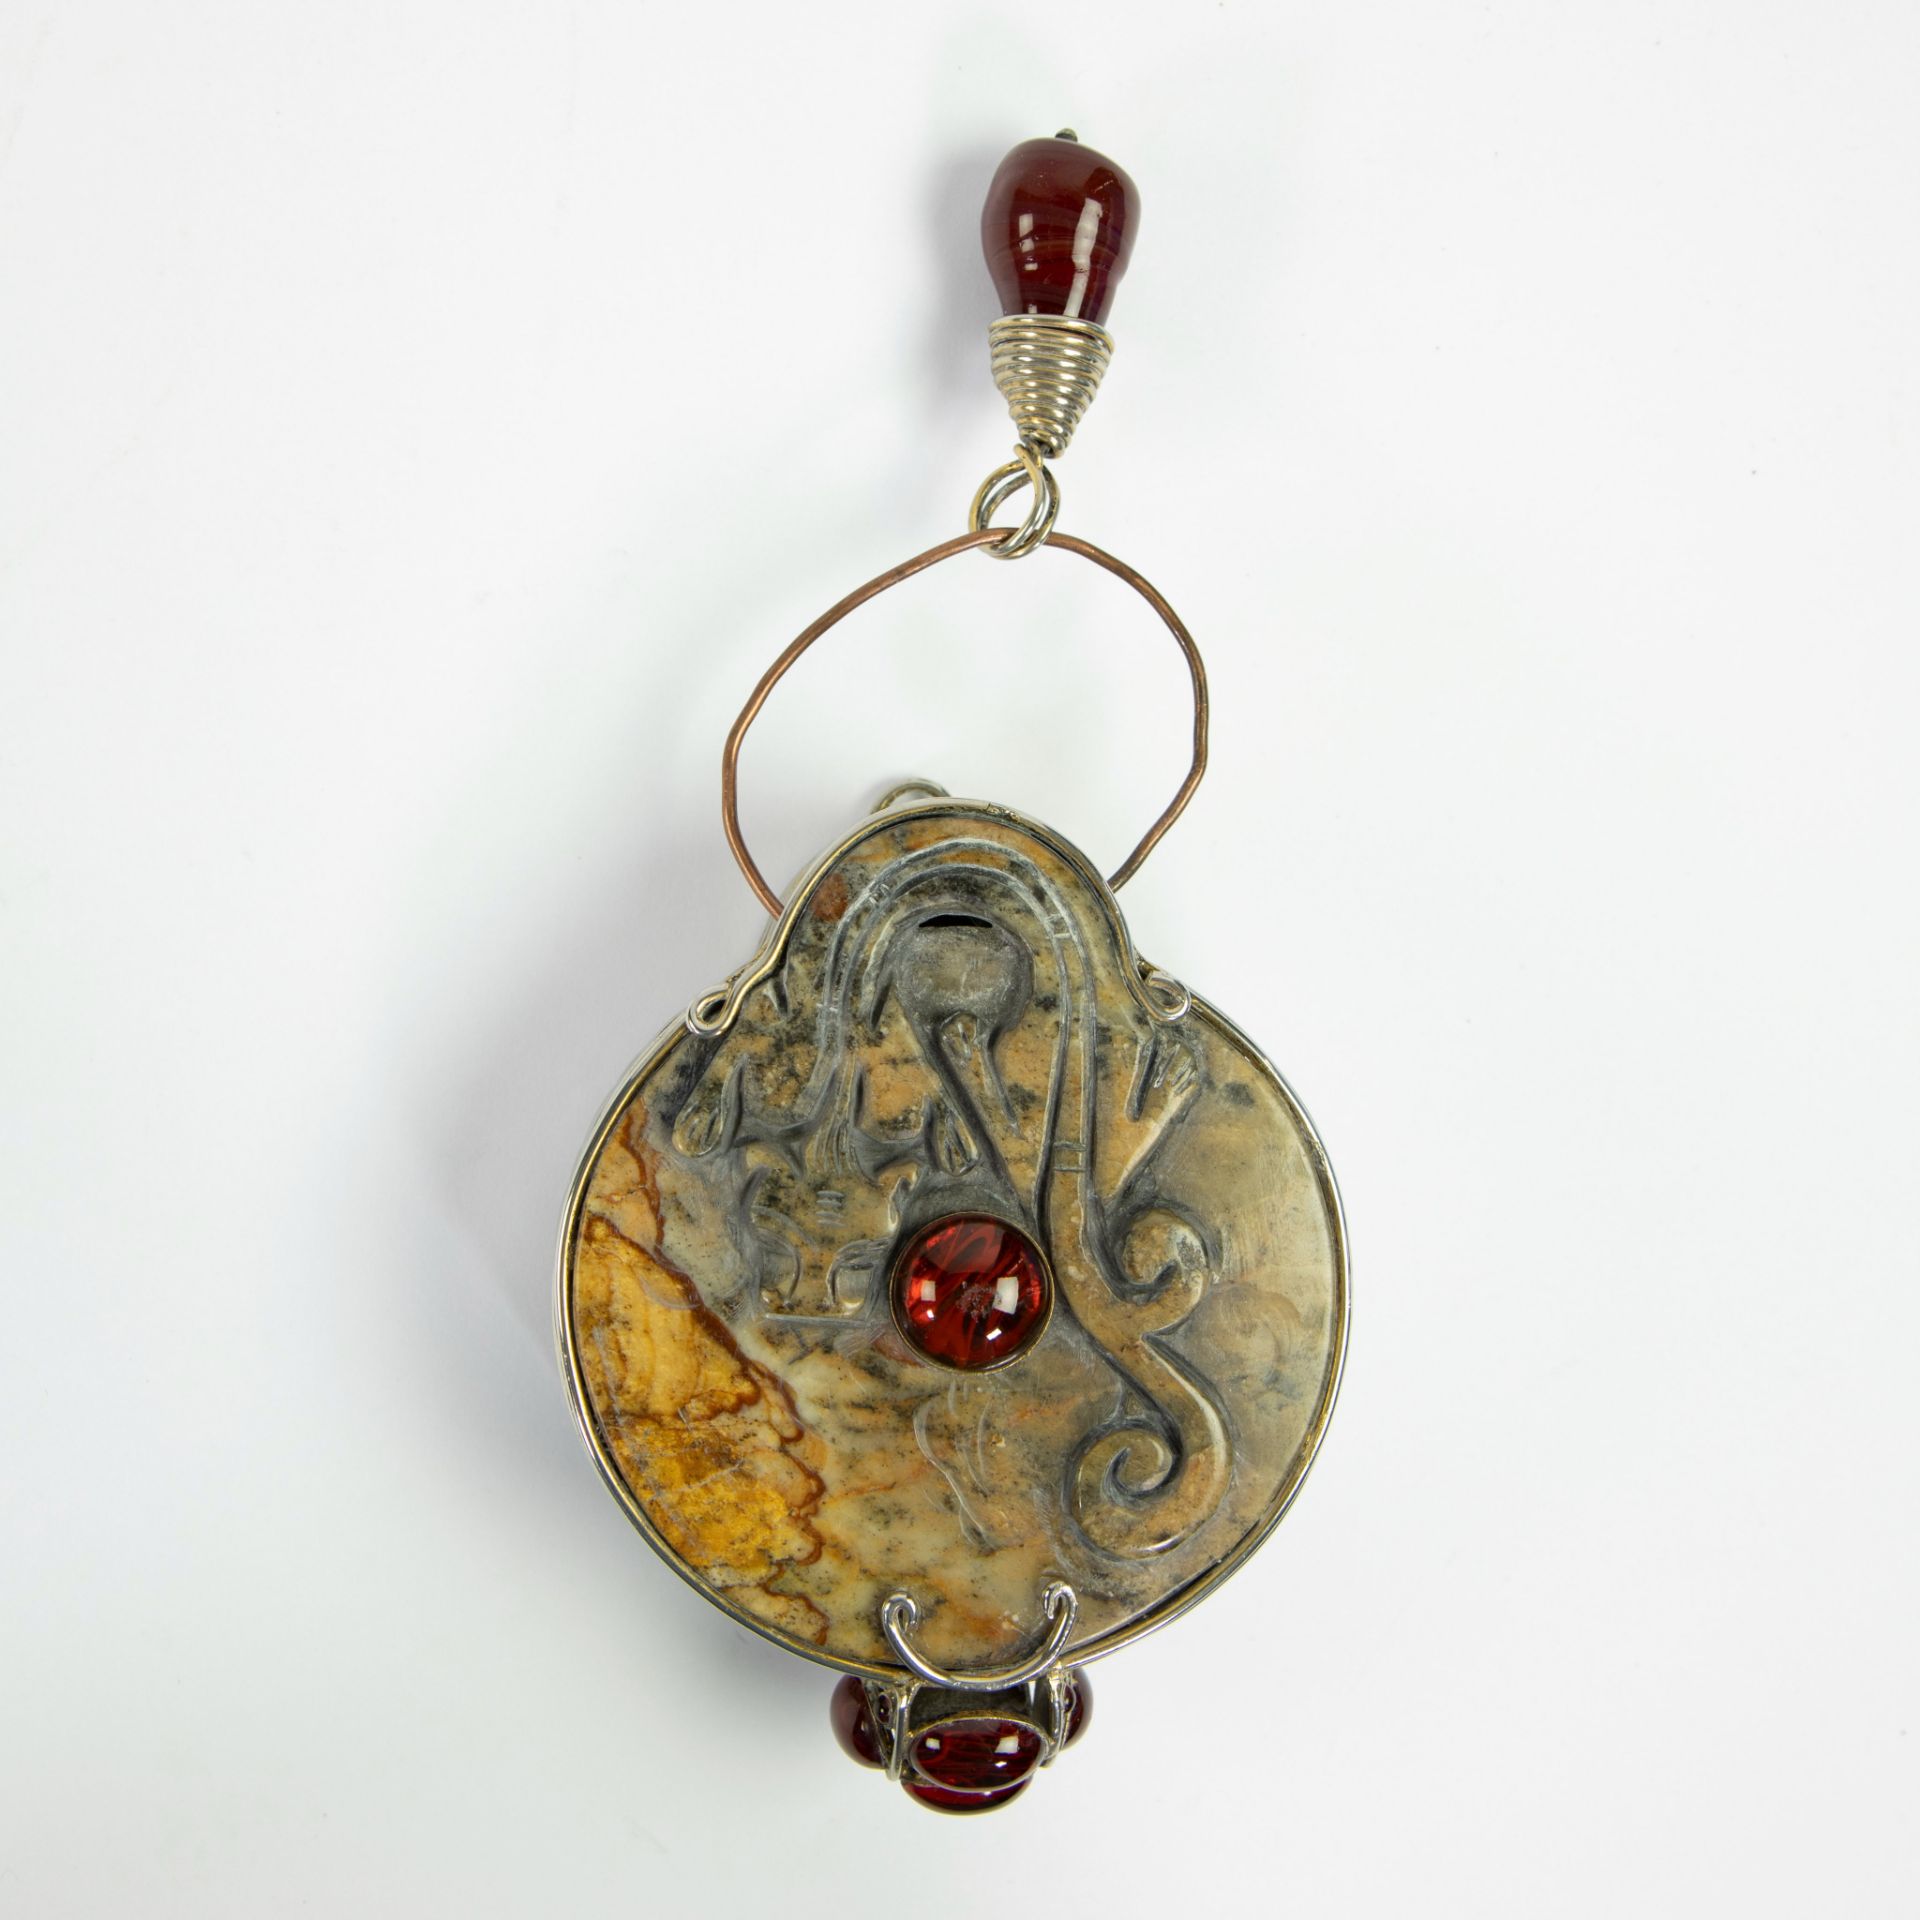 Steel bag with Iradj Moini jewelry, russet jade and glass